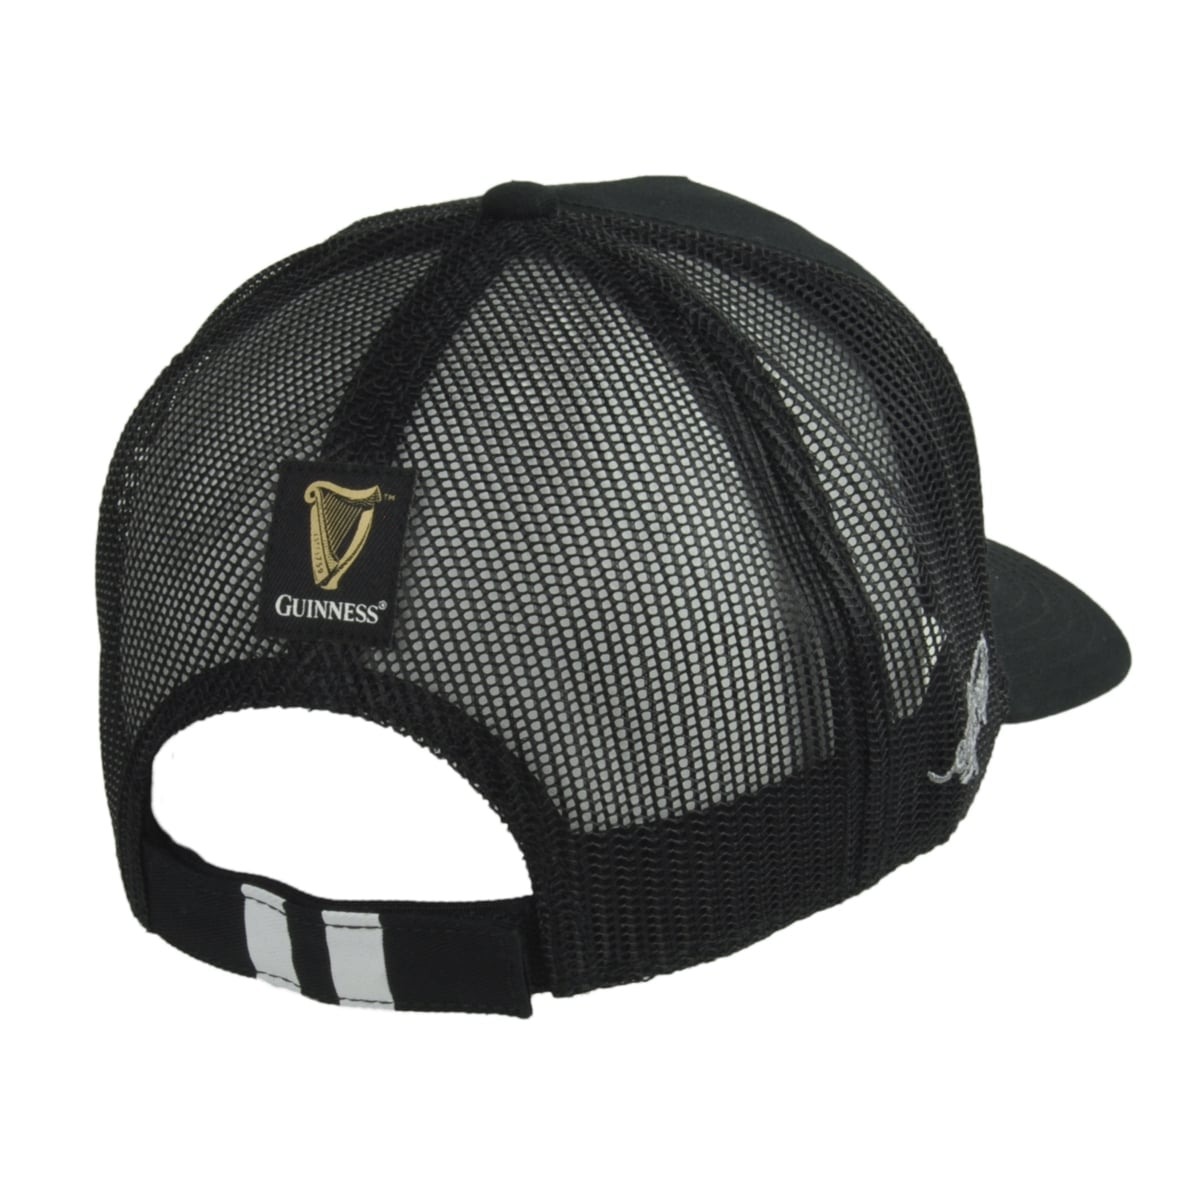 An adjustable size Guinness Premium Black & White Cap with a Guinness logo on it.